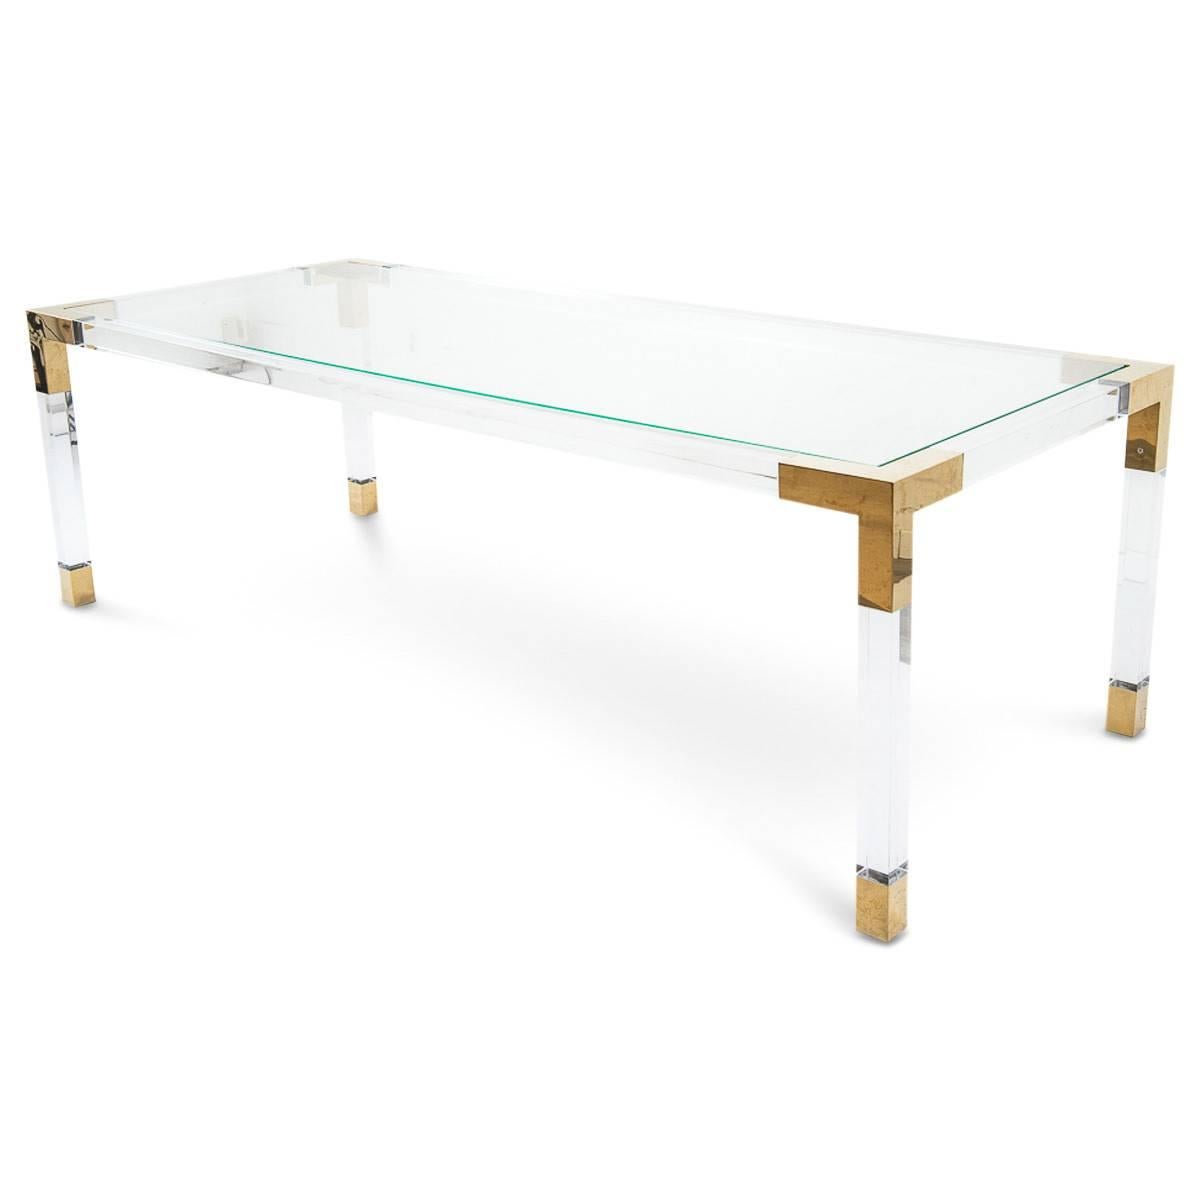 Whip your dining into shape with this beautiful Lucite dining table. This is the perfect addition to our Classic Trousdale look of brass and Lucite. This comes with an inset star fire glass top.

Dimension

96